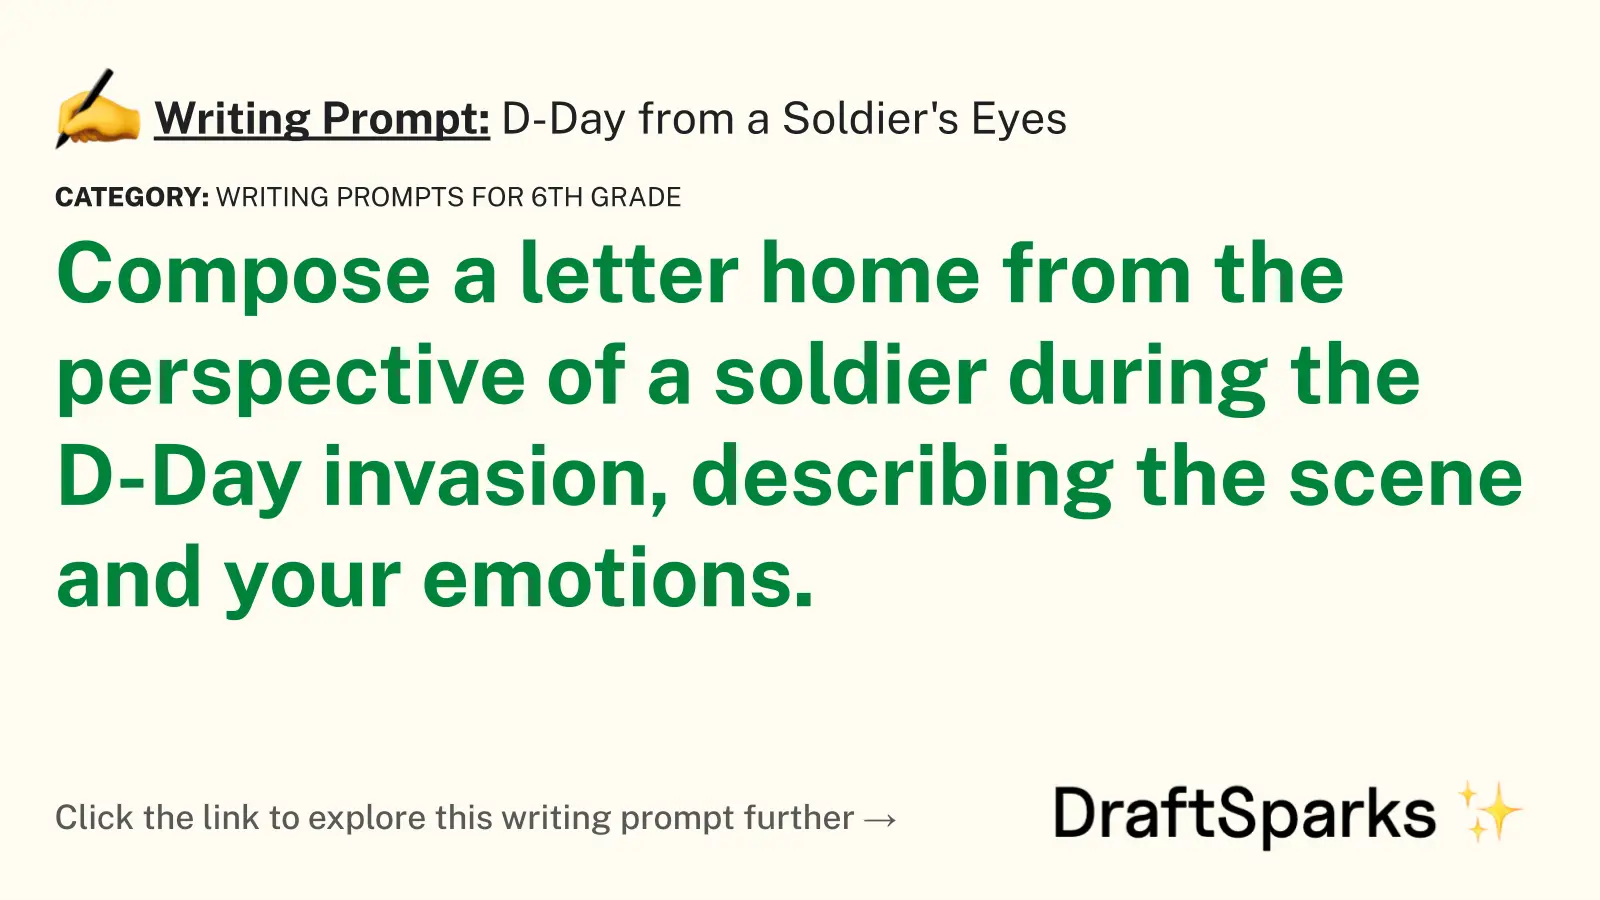 D-Day from a Soldier’s Eyes